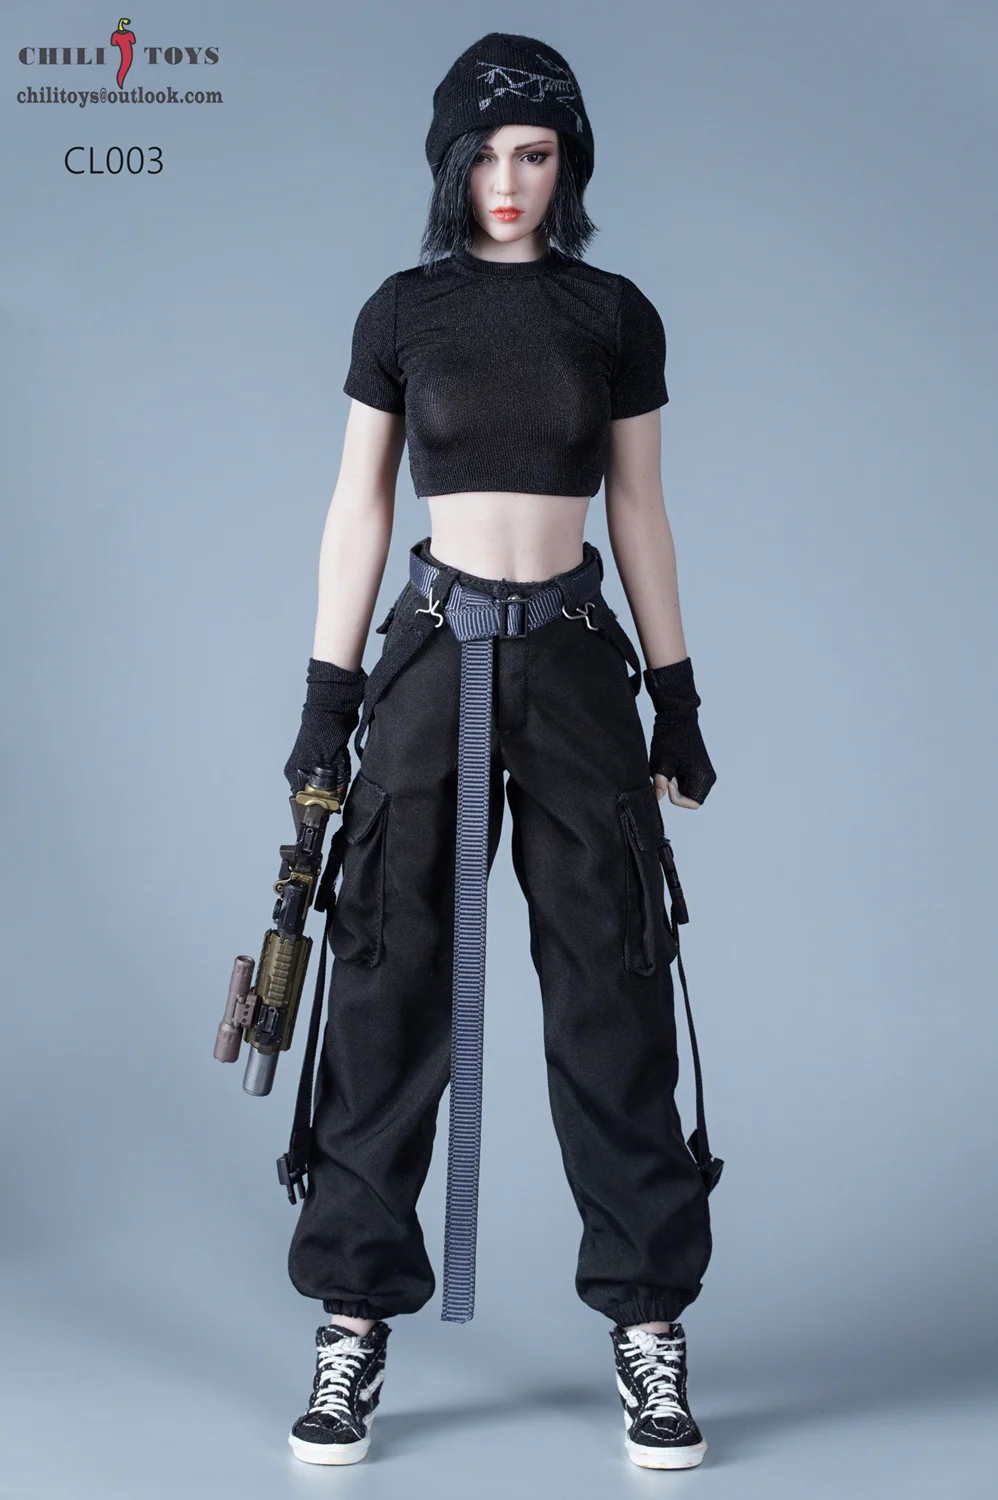 

1/6 Female Soldier Clothes CHILI TOYS Functional Overalls Suit Trend Black Multi-pocket Model Clothing Accessories fit 12" Body